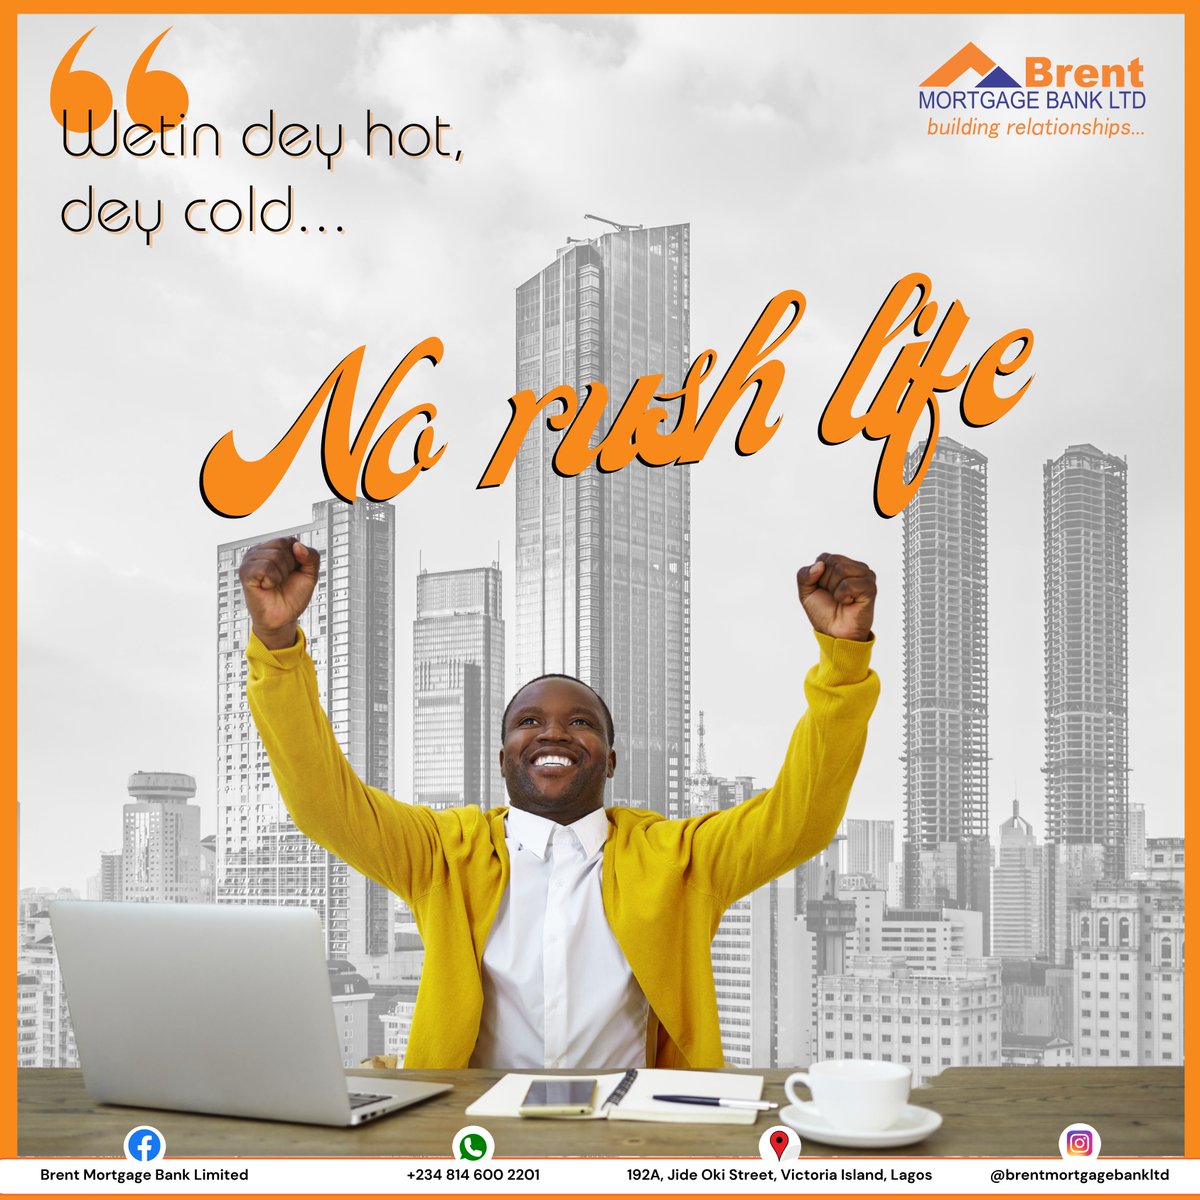 Your Thursday morning reminder to pace yourself.

'Problem no dey finish', one step at a time. You've got this!

#brentMB #realestate #mortgagebanker #mortgagebank #mortgage #lagosproperties #lagosrealestate #nigeria #nigeriahomes #abuja #housing #homes #mindset #homedecor #home